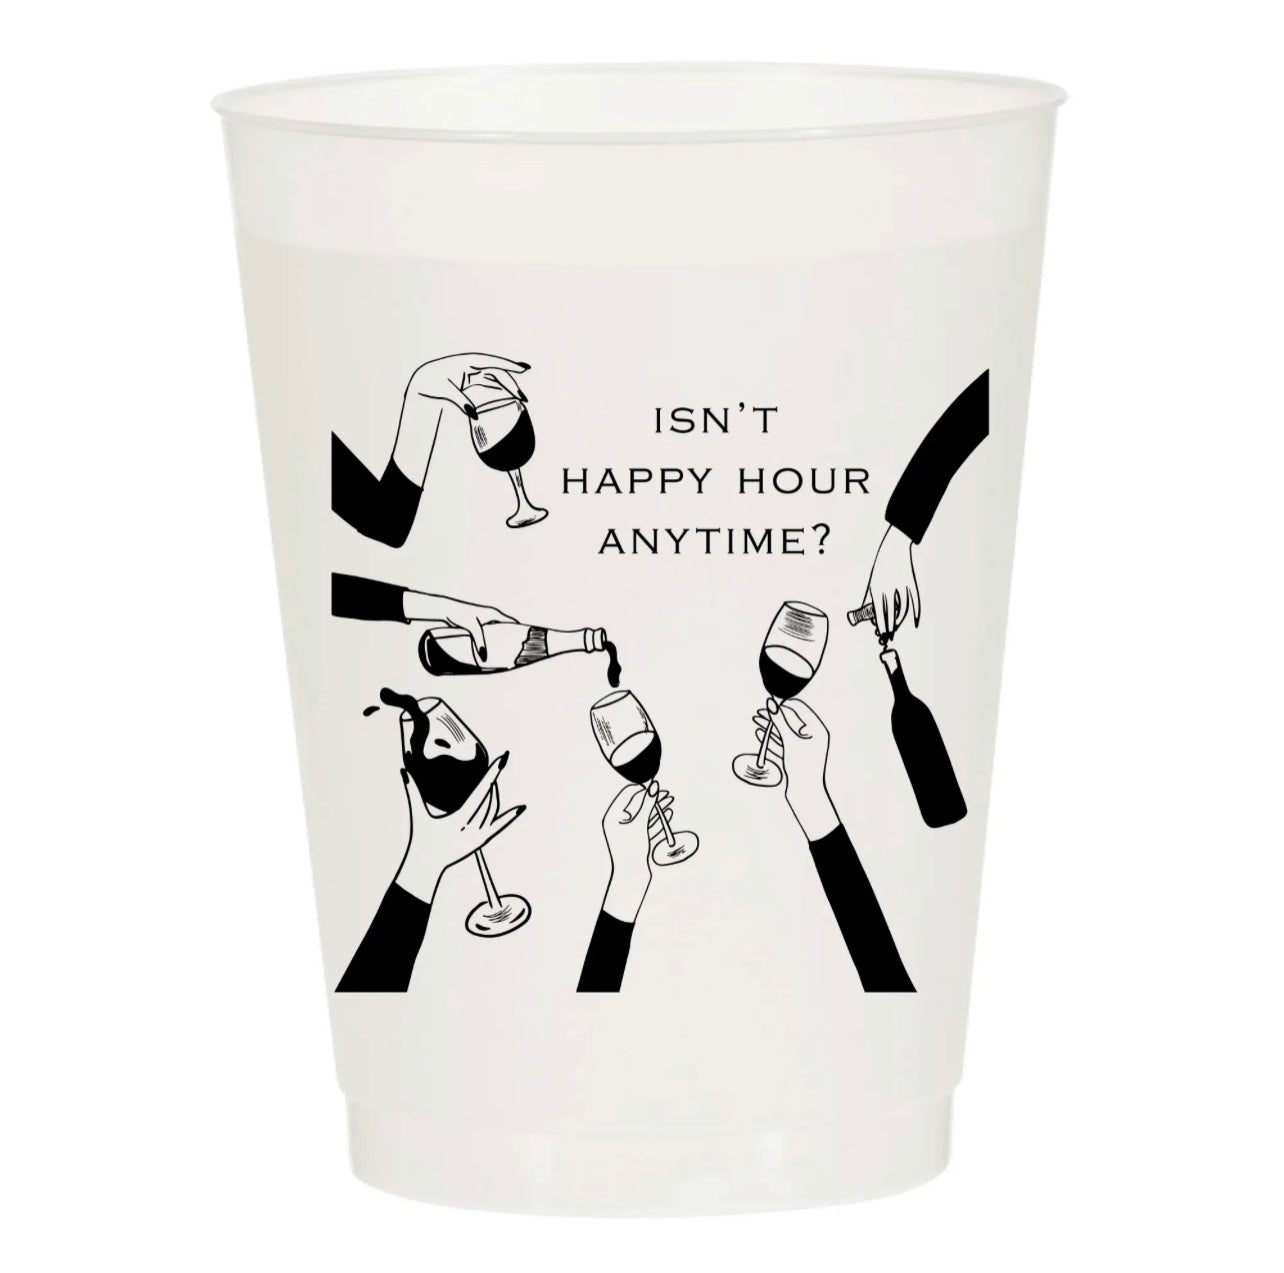 16 oz white plastic frost cup with black retro design of hands holding wine glasses coming in to make a toast with the words "Isn't happy hour anytime?"